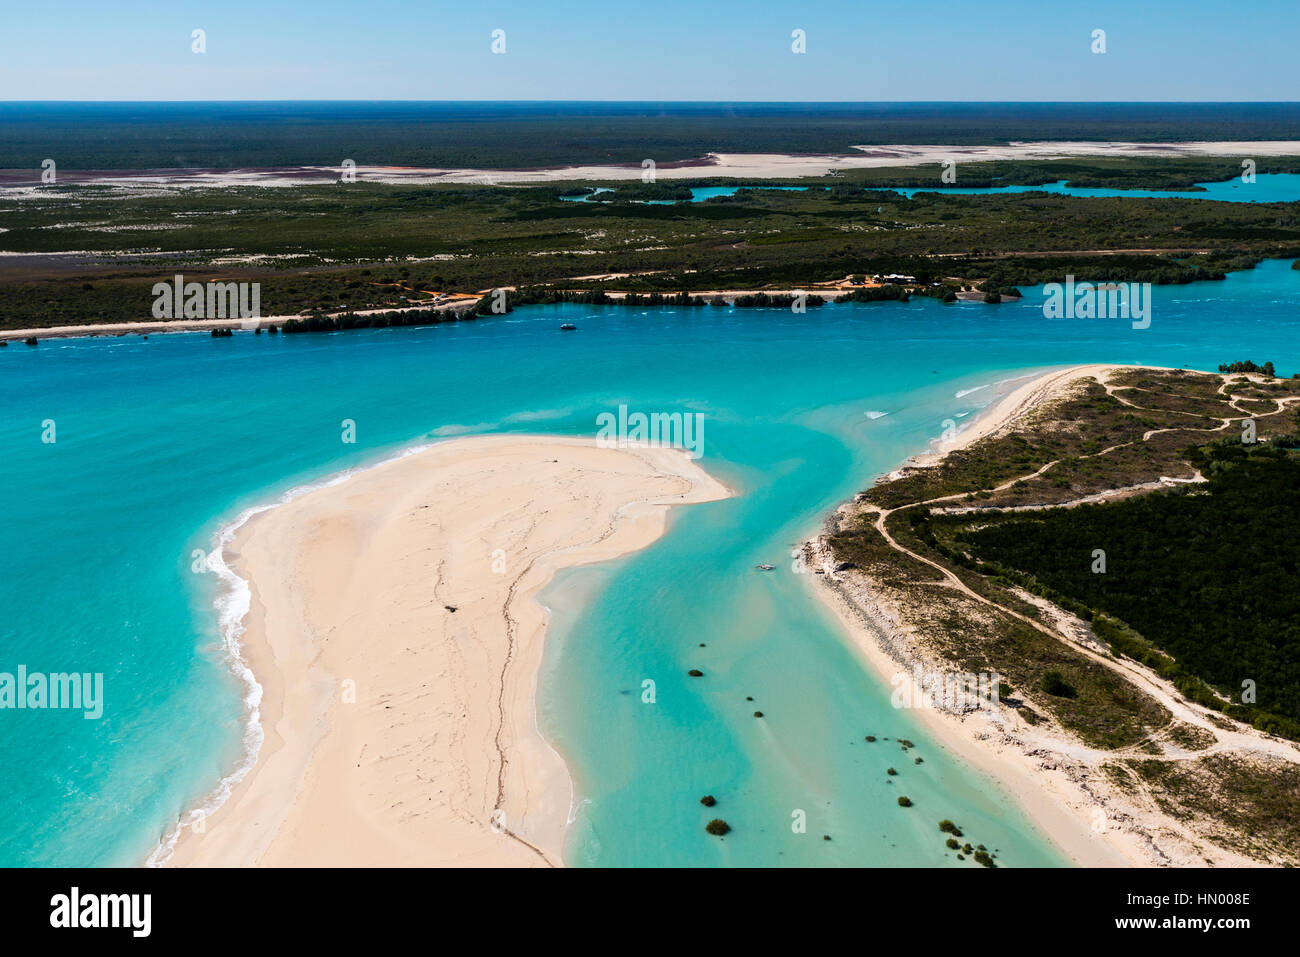 A tidal river inlet and white sandy beach in a pristine turquoise sea. Stock Photo